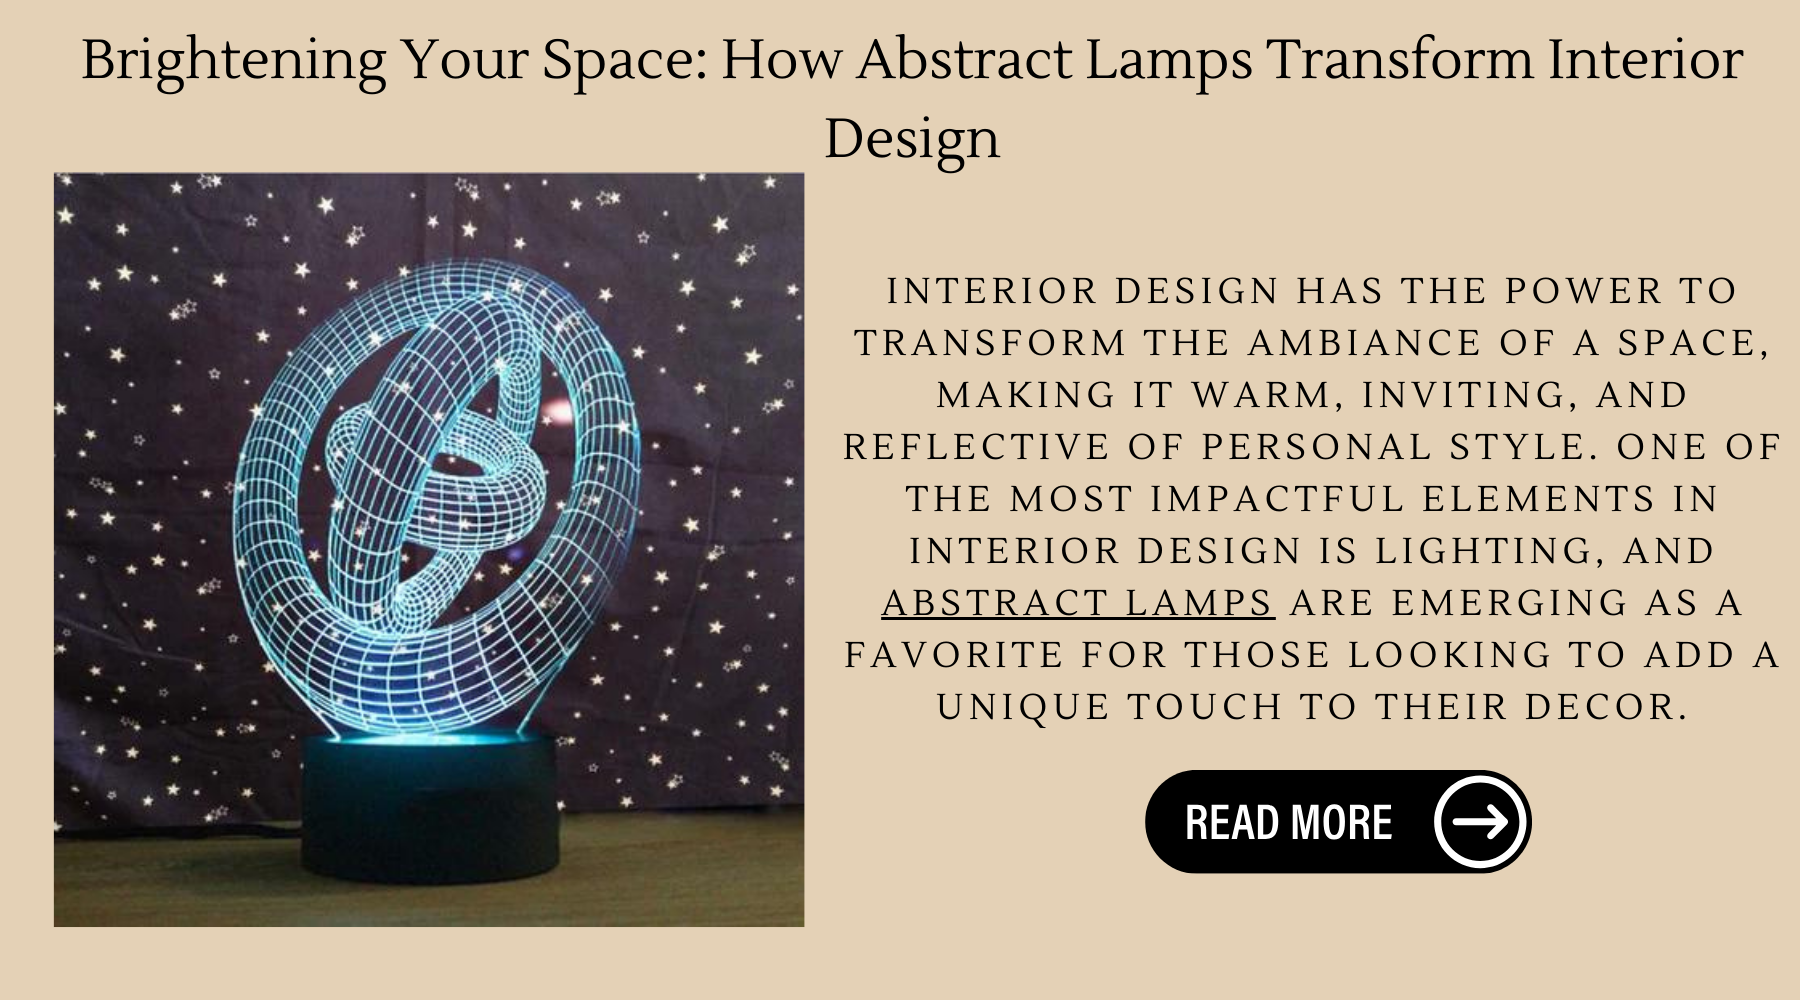 Brightening Your Space: How Abstract Lamps Transform Interior Design